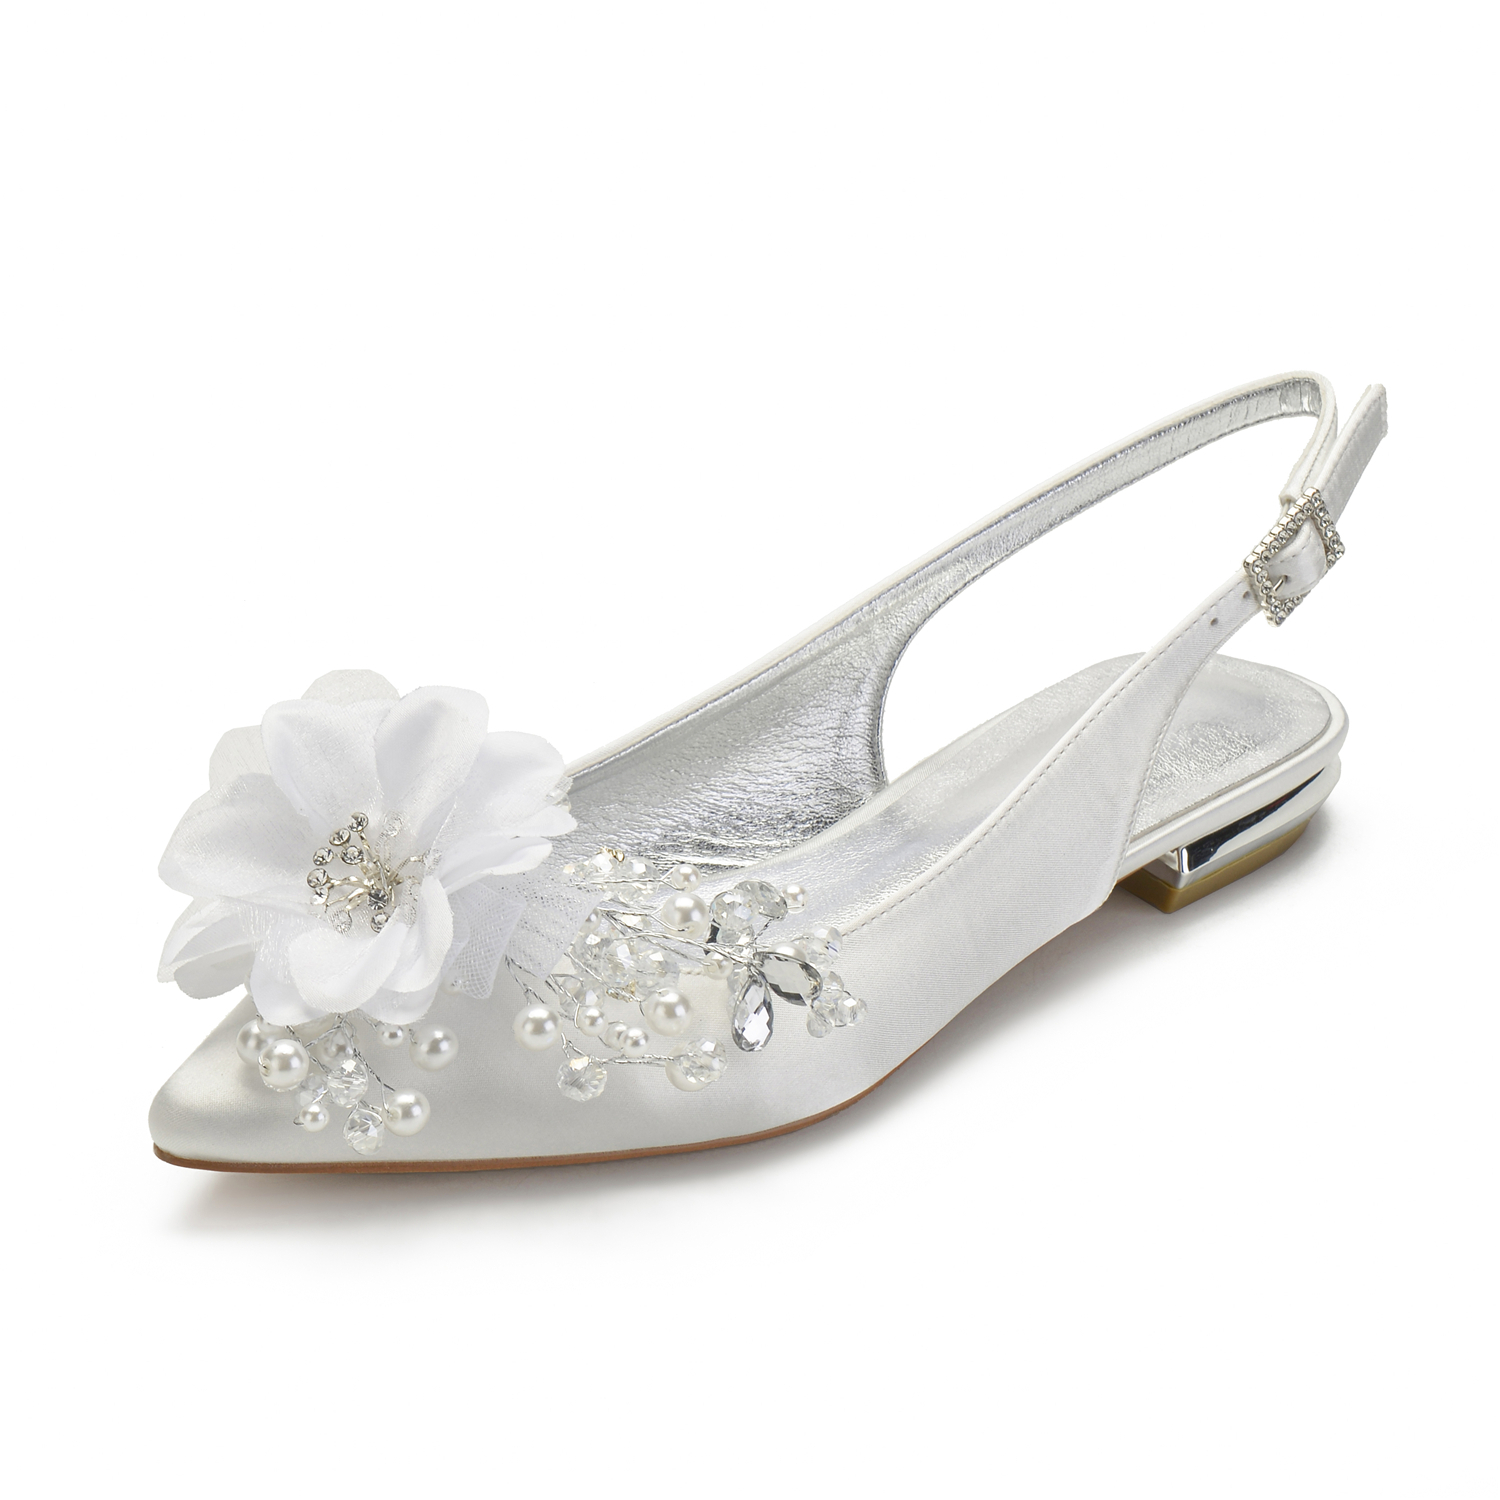 Creativesugar open toe satin dress flats with pearls flower bridal wedding prom shoes white ivory slingback shoes sweet lady